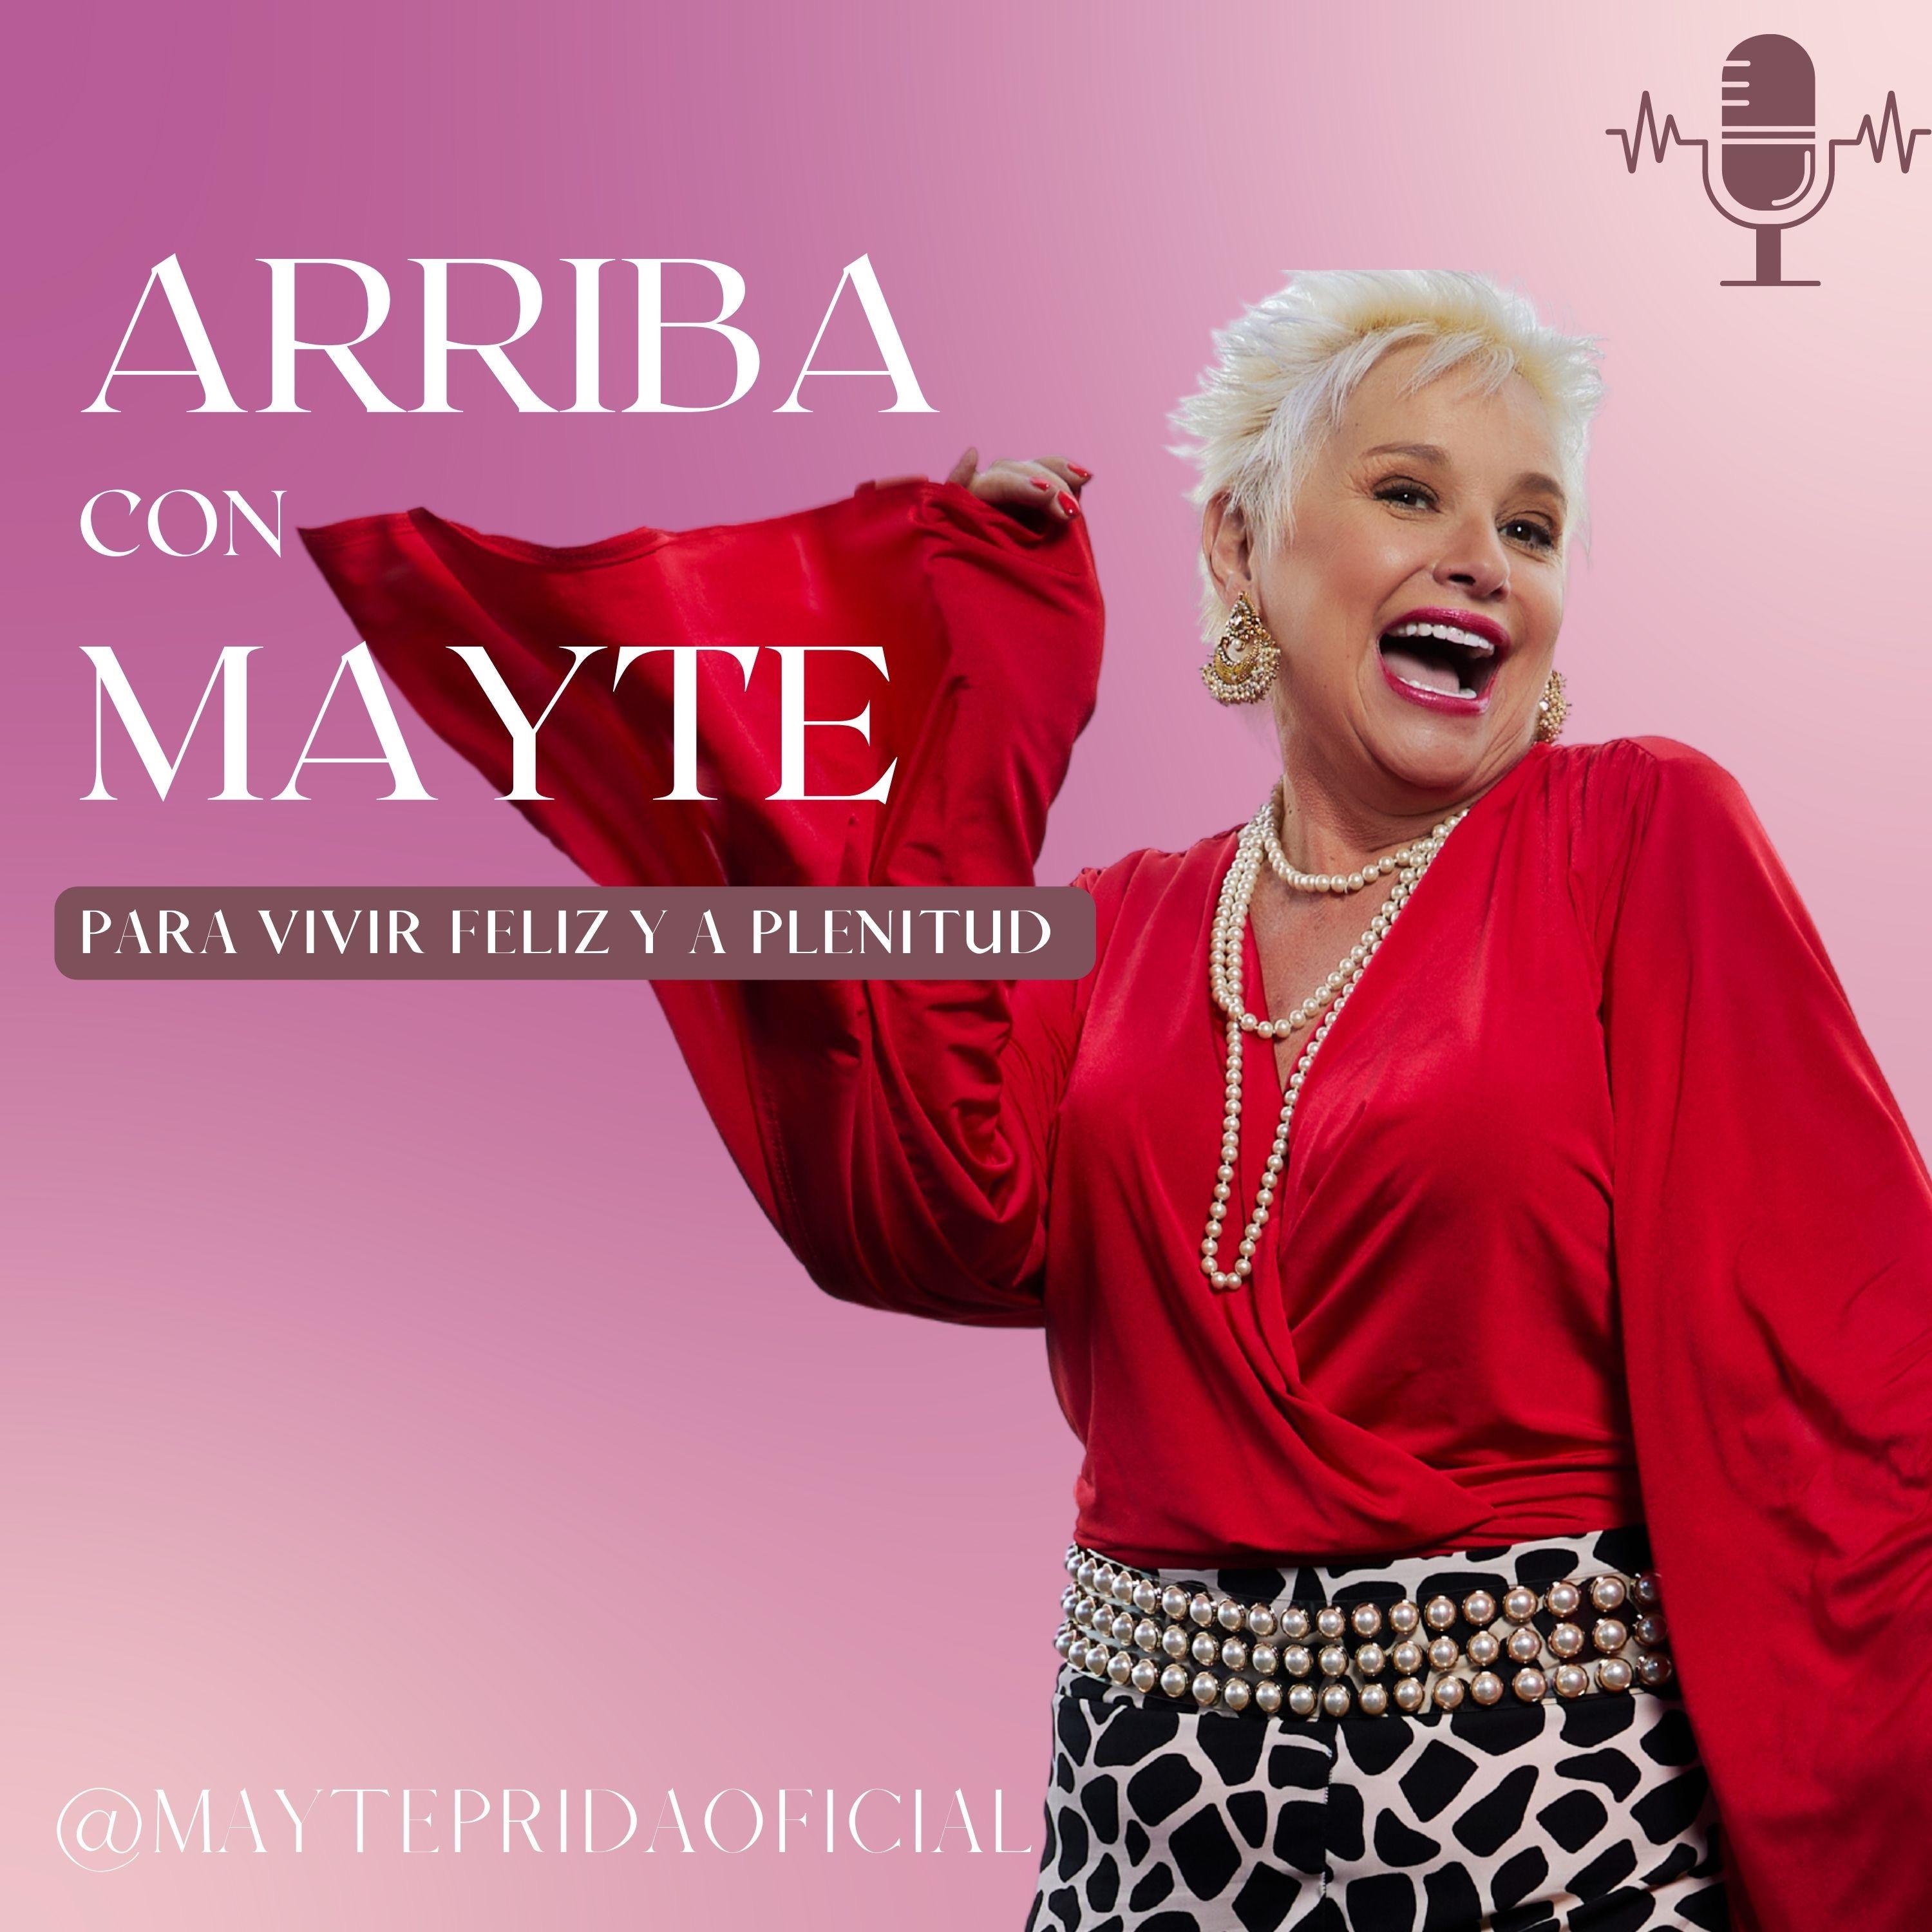 Show poster of Arriba con Mayte